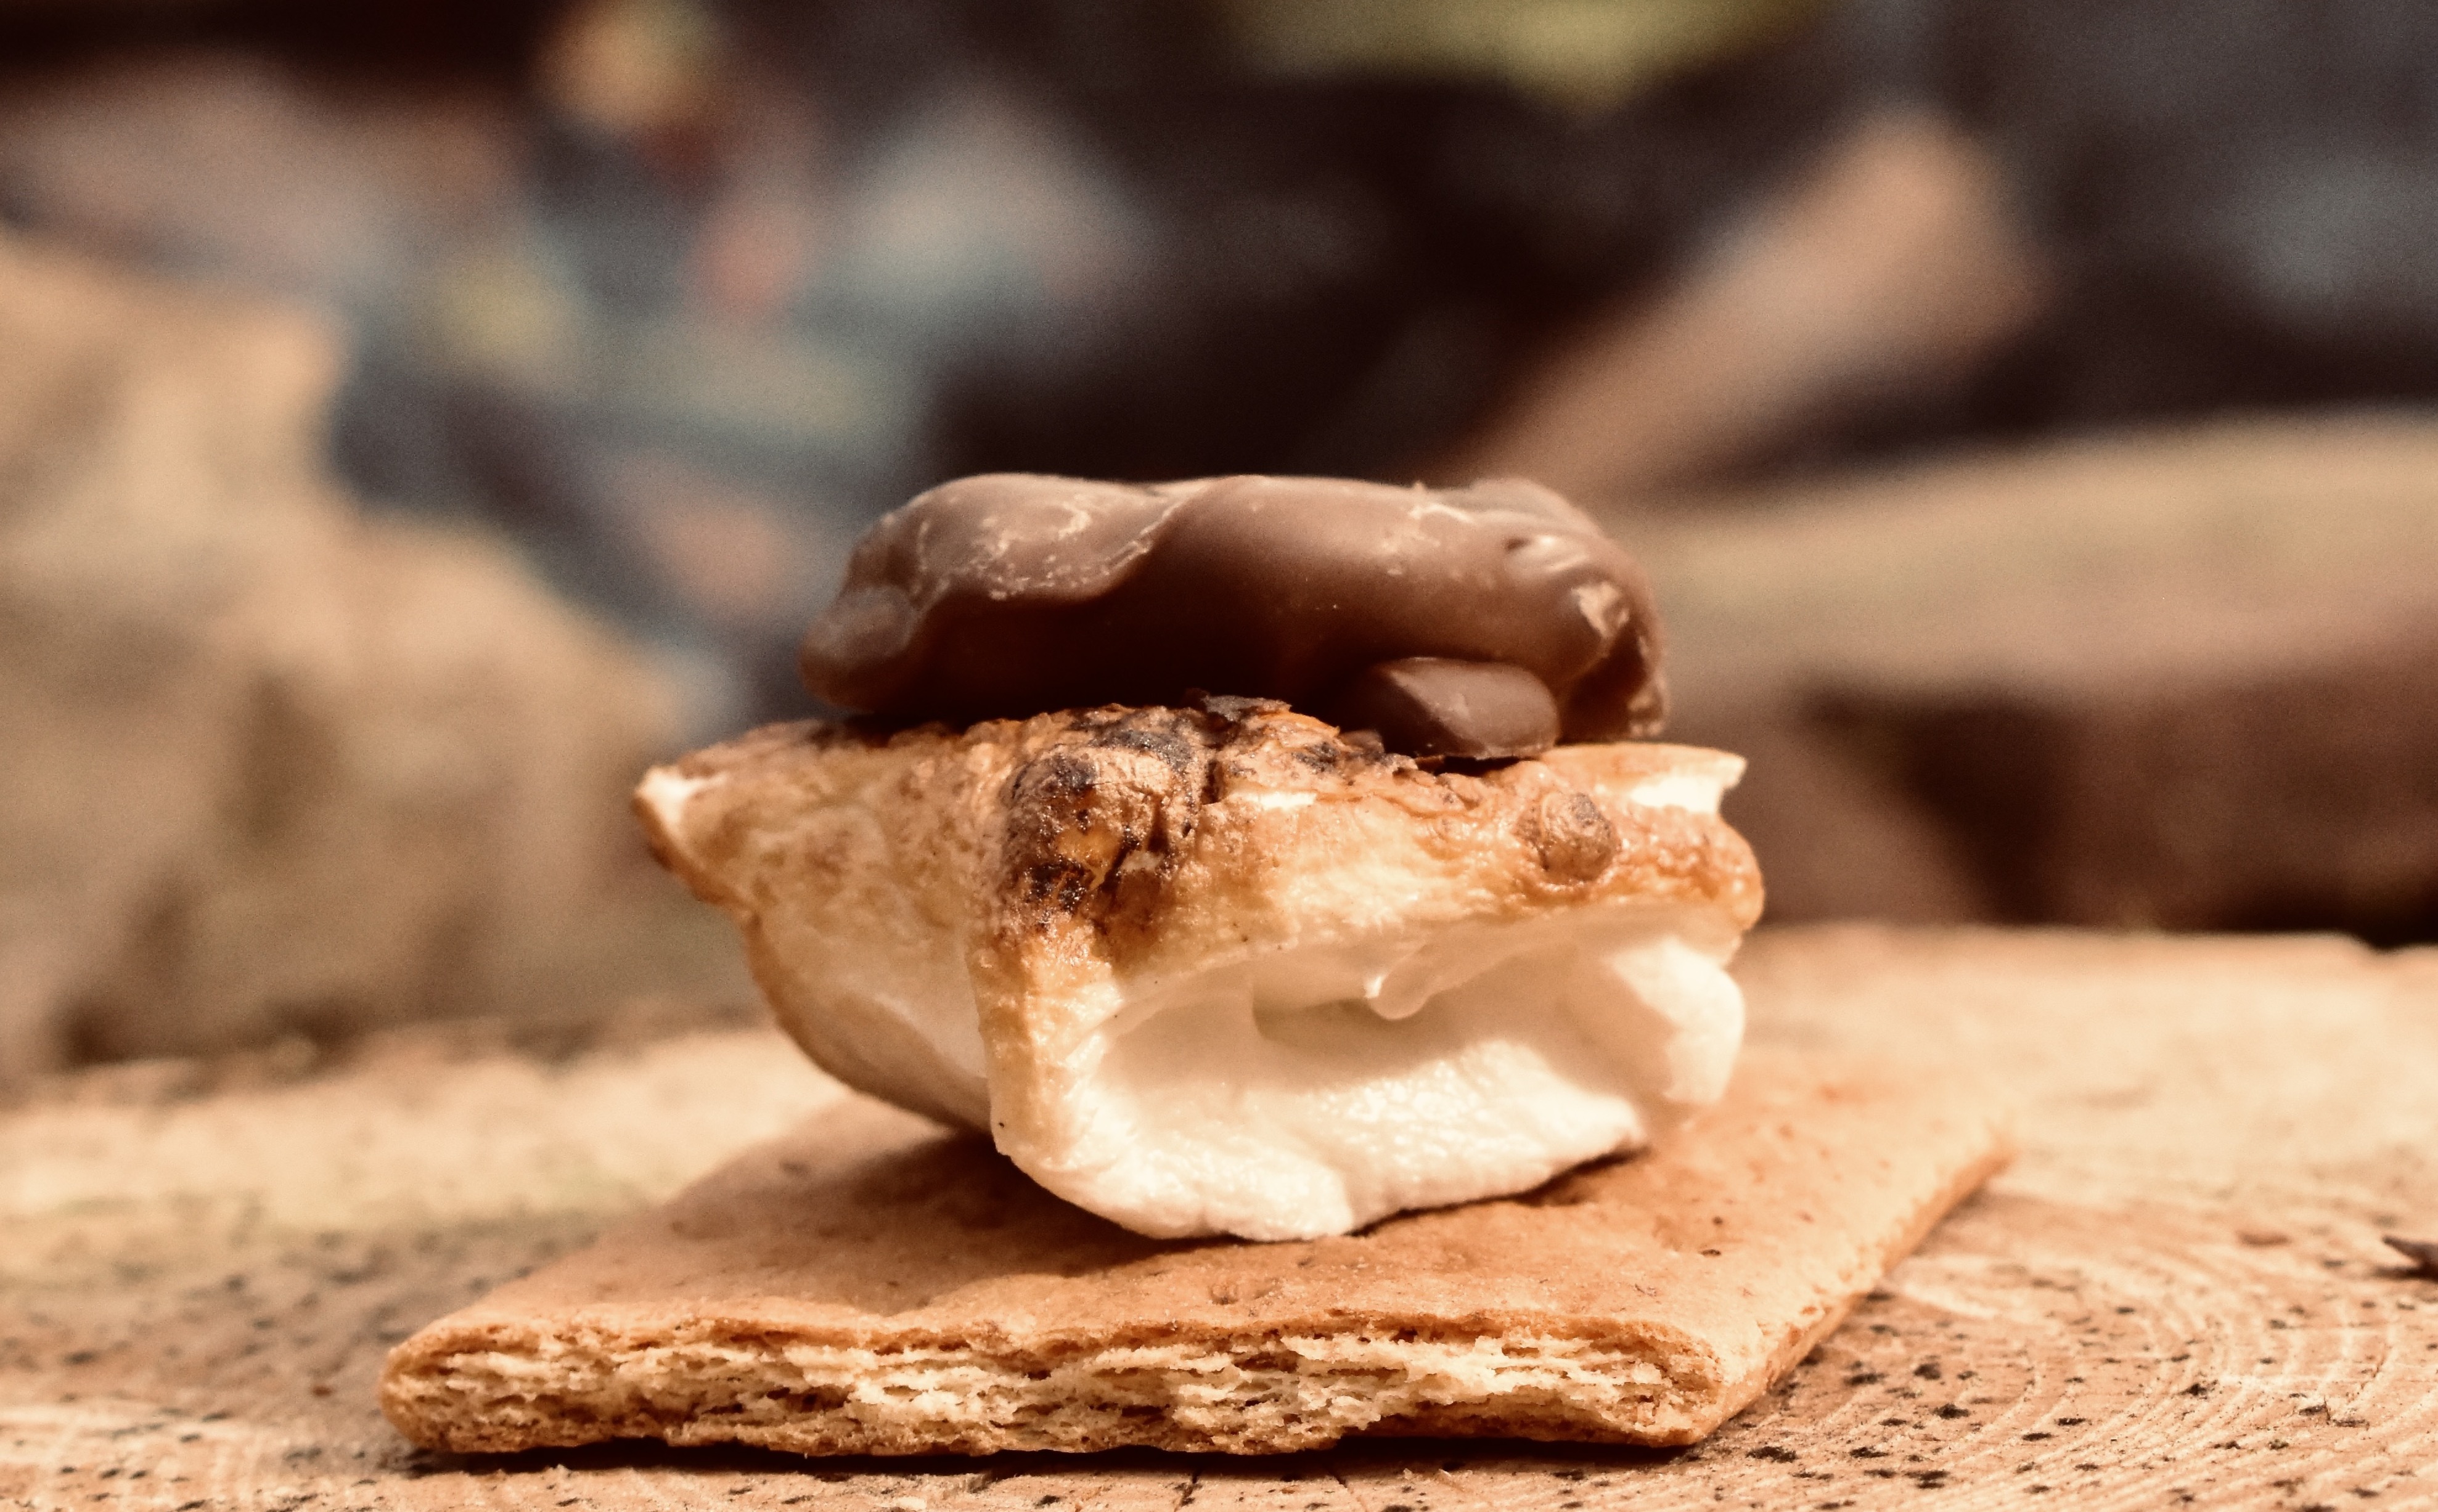 Roasted marshmallow with milk chocolate-covered pretzel